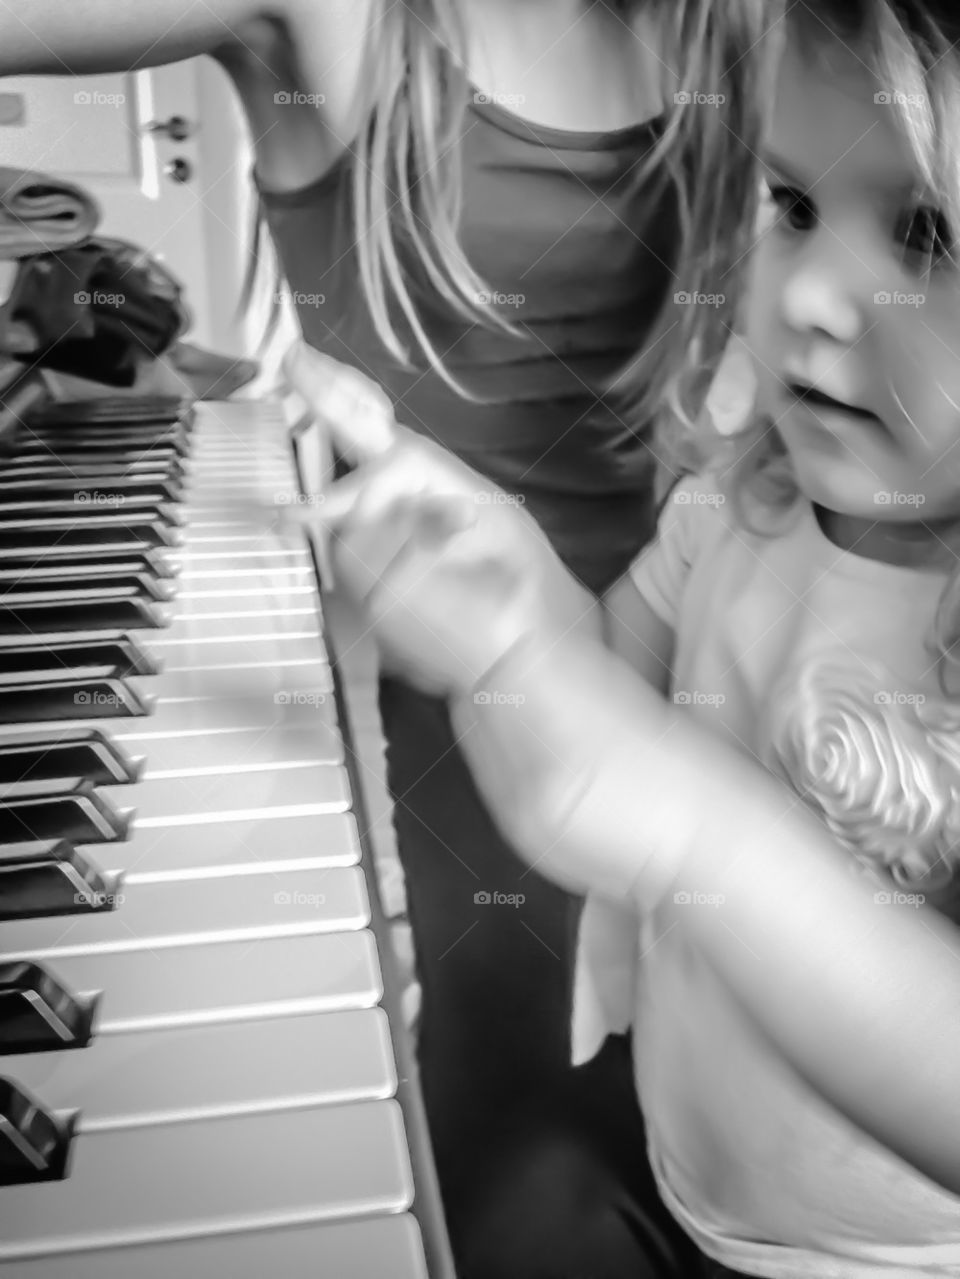 The girls playing piano! 